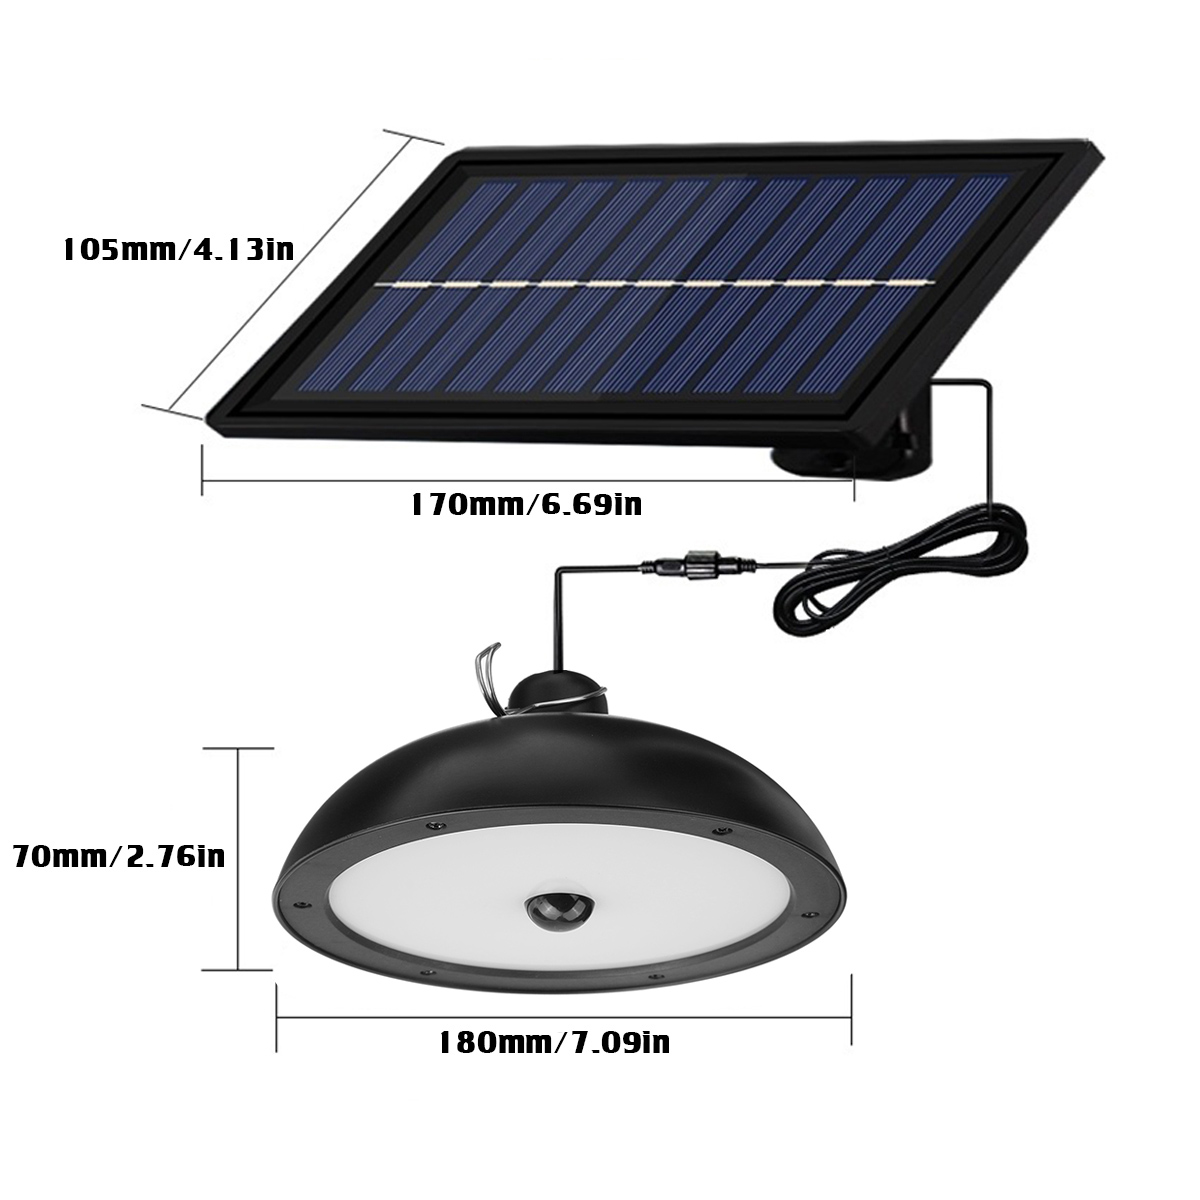 Split-Solar-Light-Remote-Led-Lights-With-Extension-Outdoor-Waterproof-Wall-Lamp-Sunlight-Powered-Lan-1935370-3